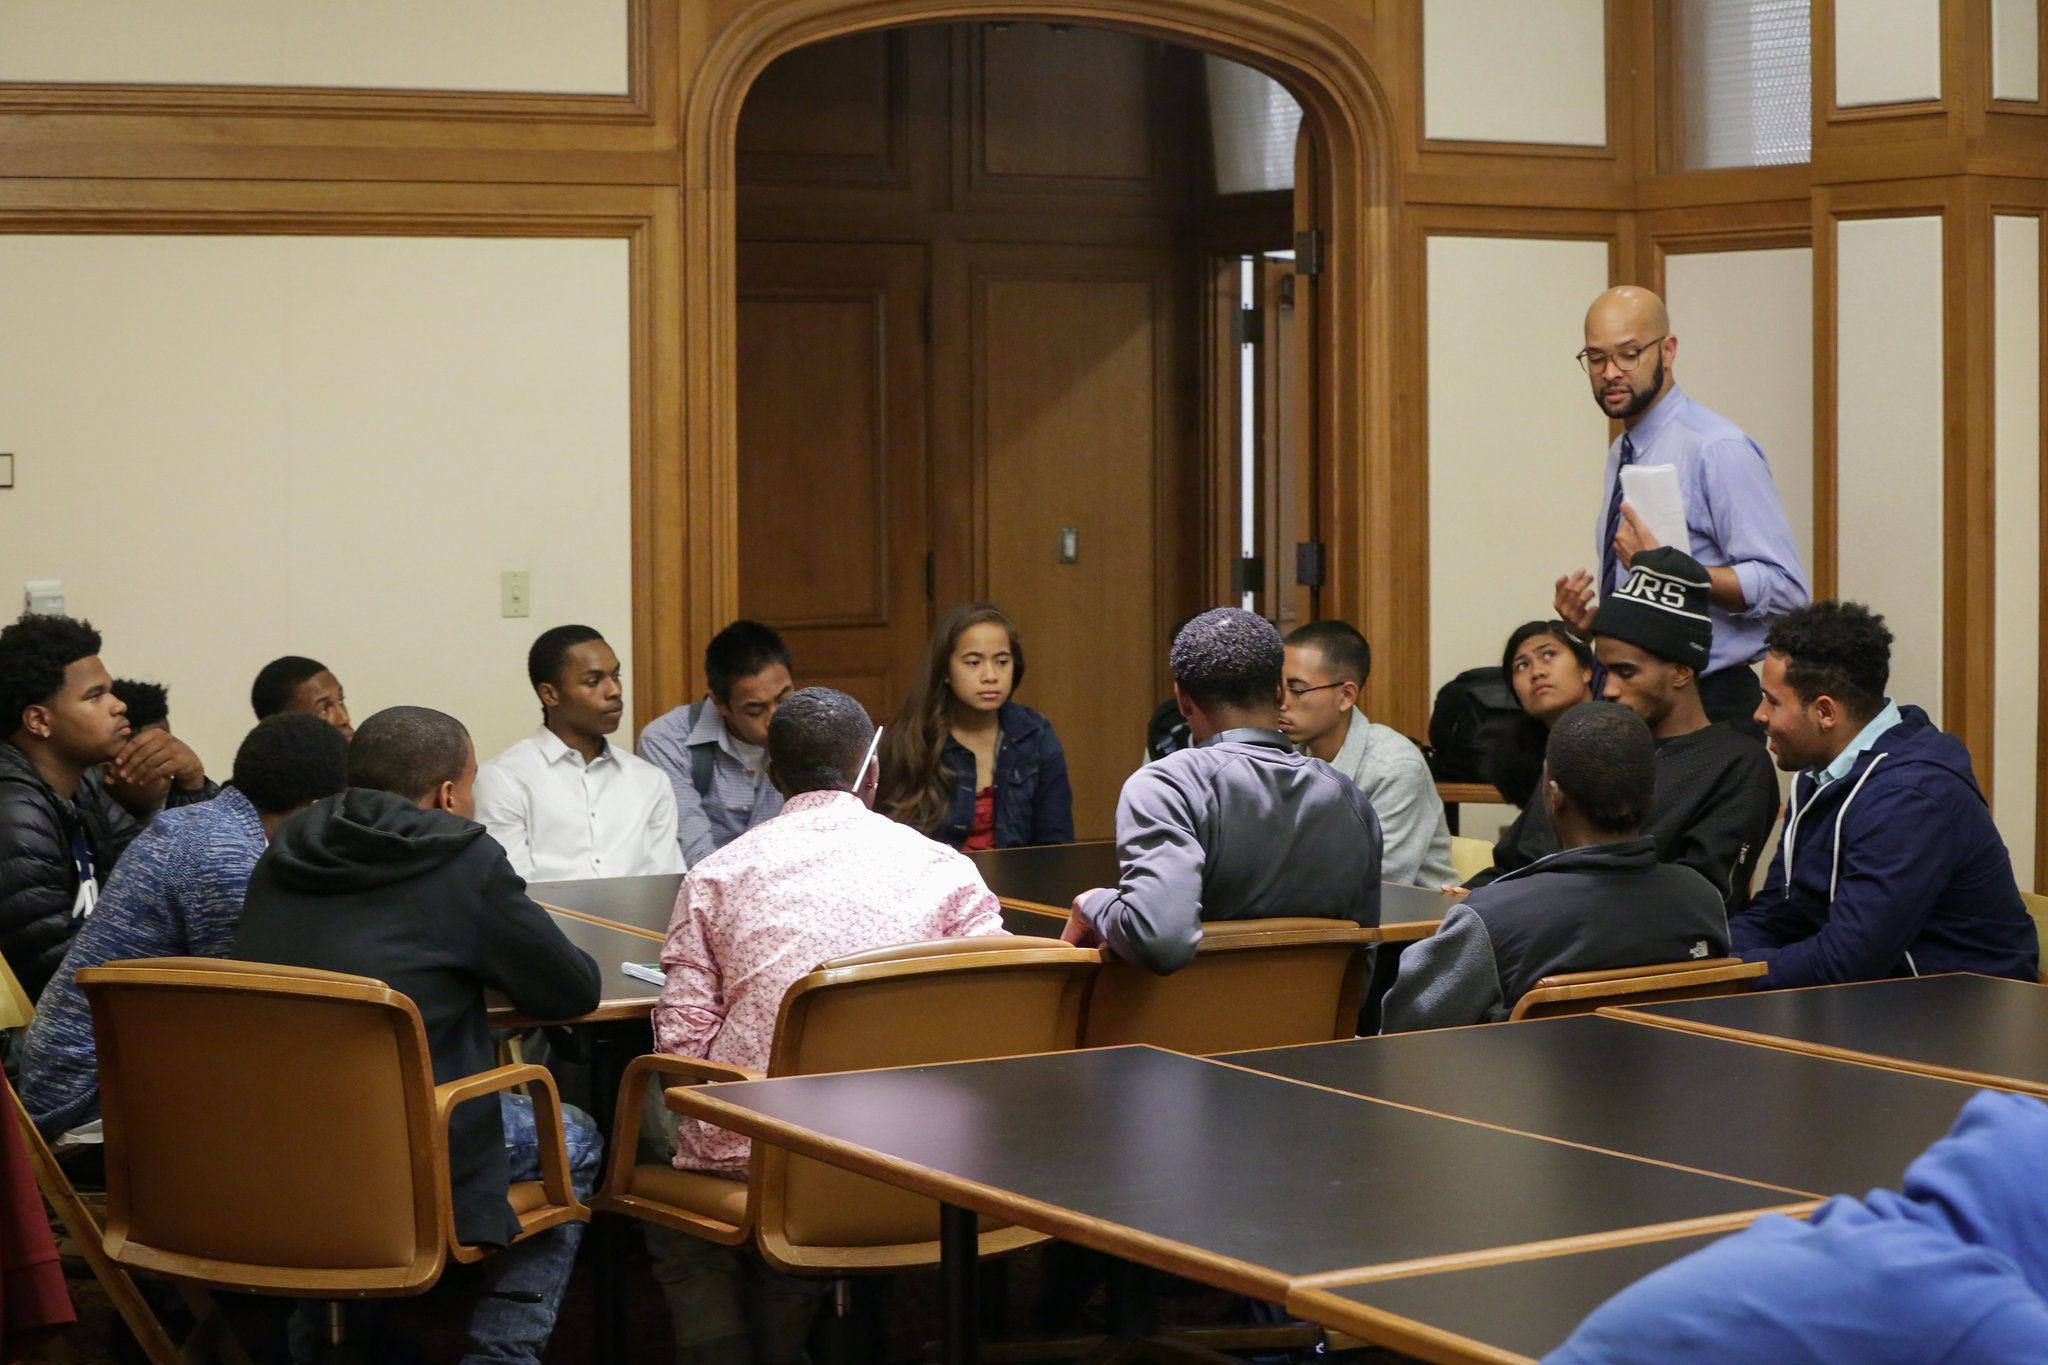 YouthDiscussionSFCityHall-6170.jpg